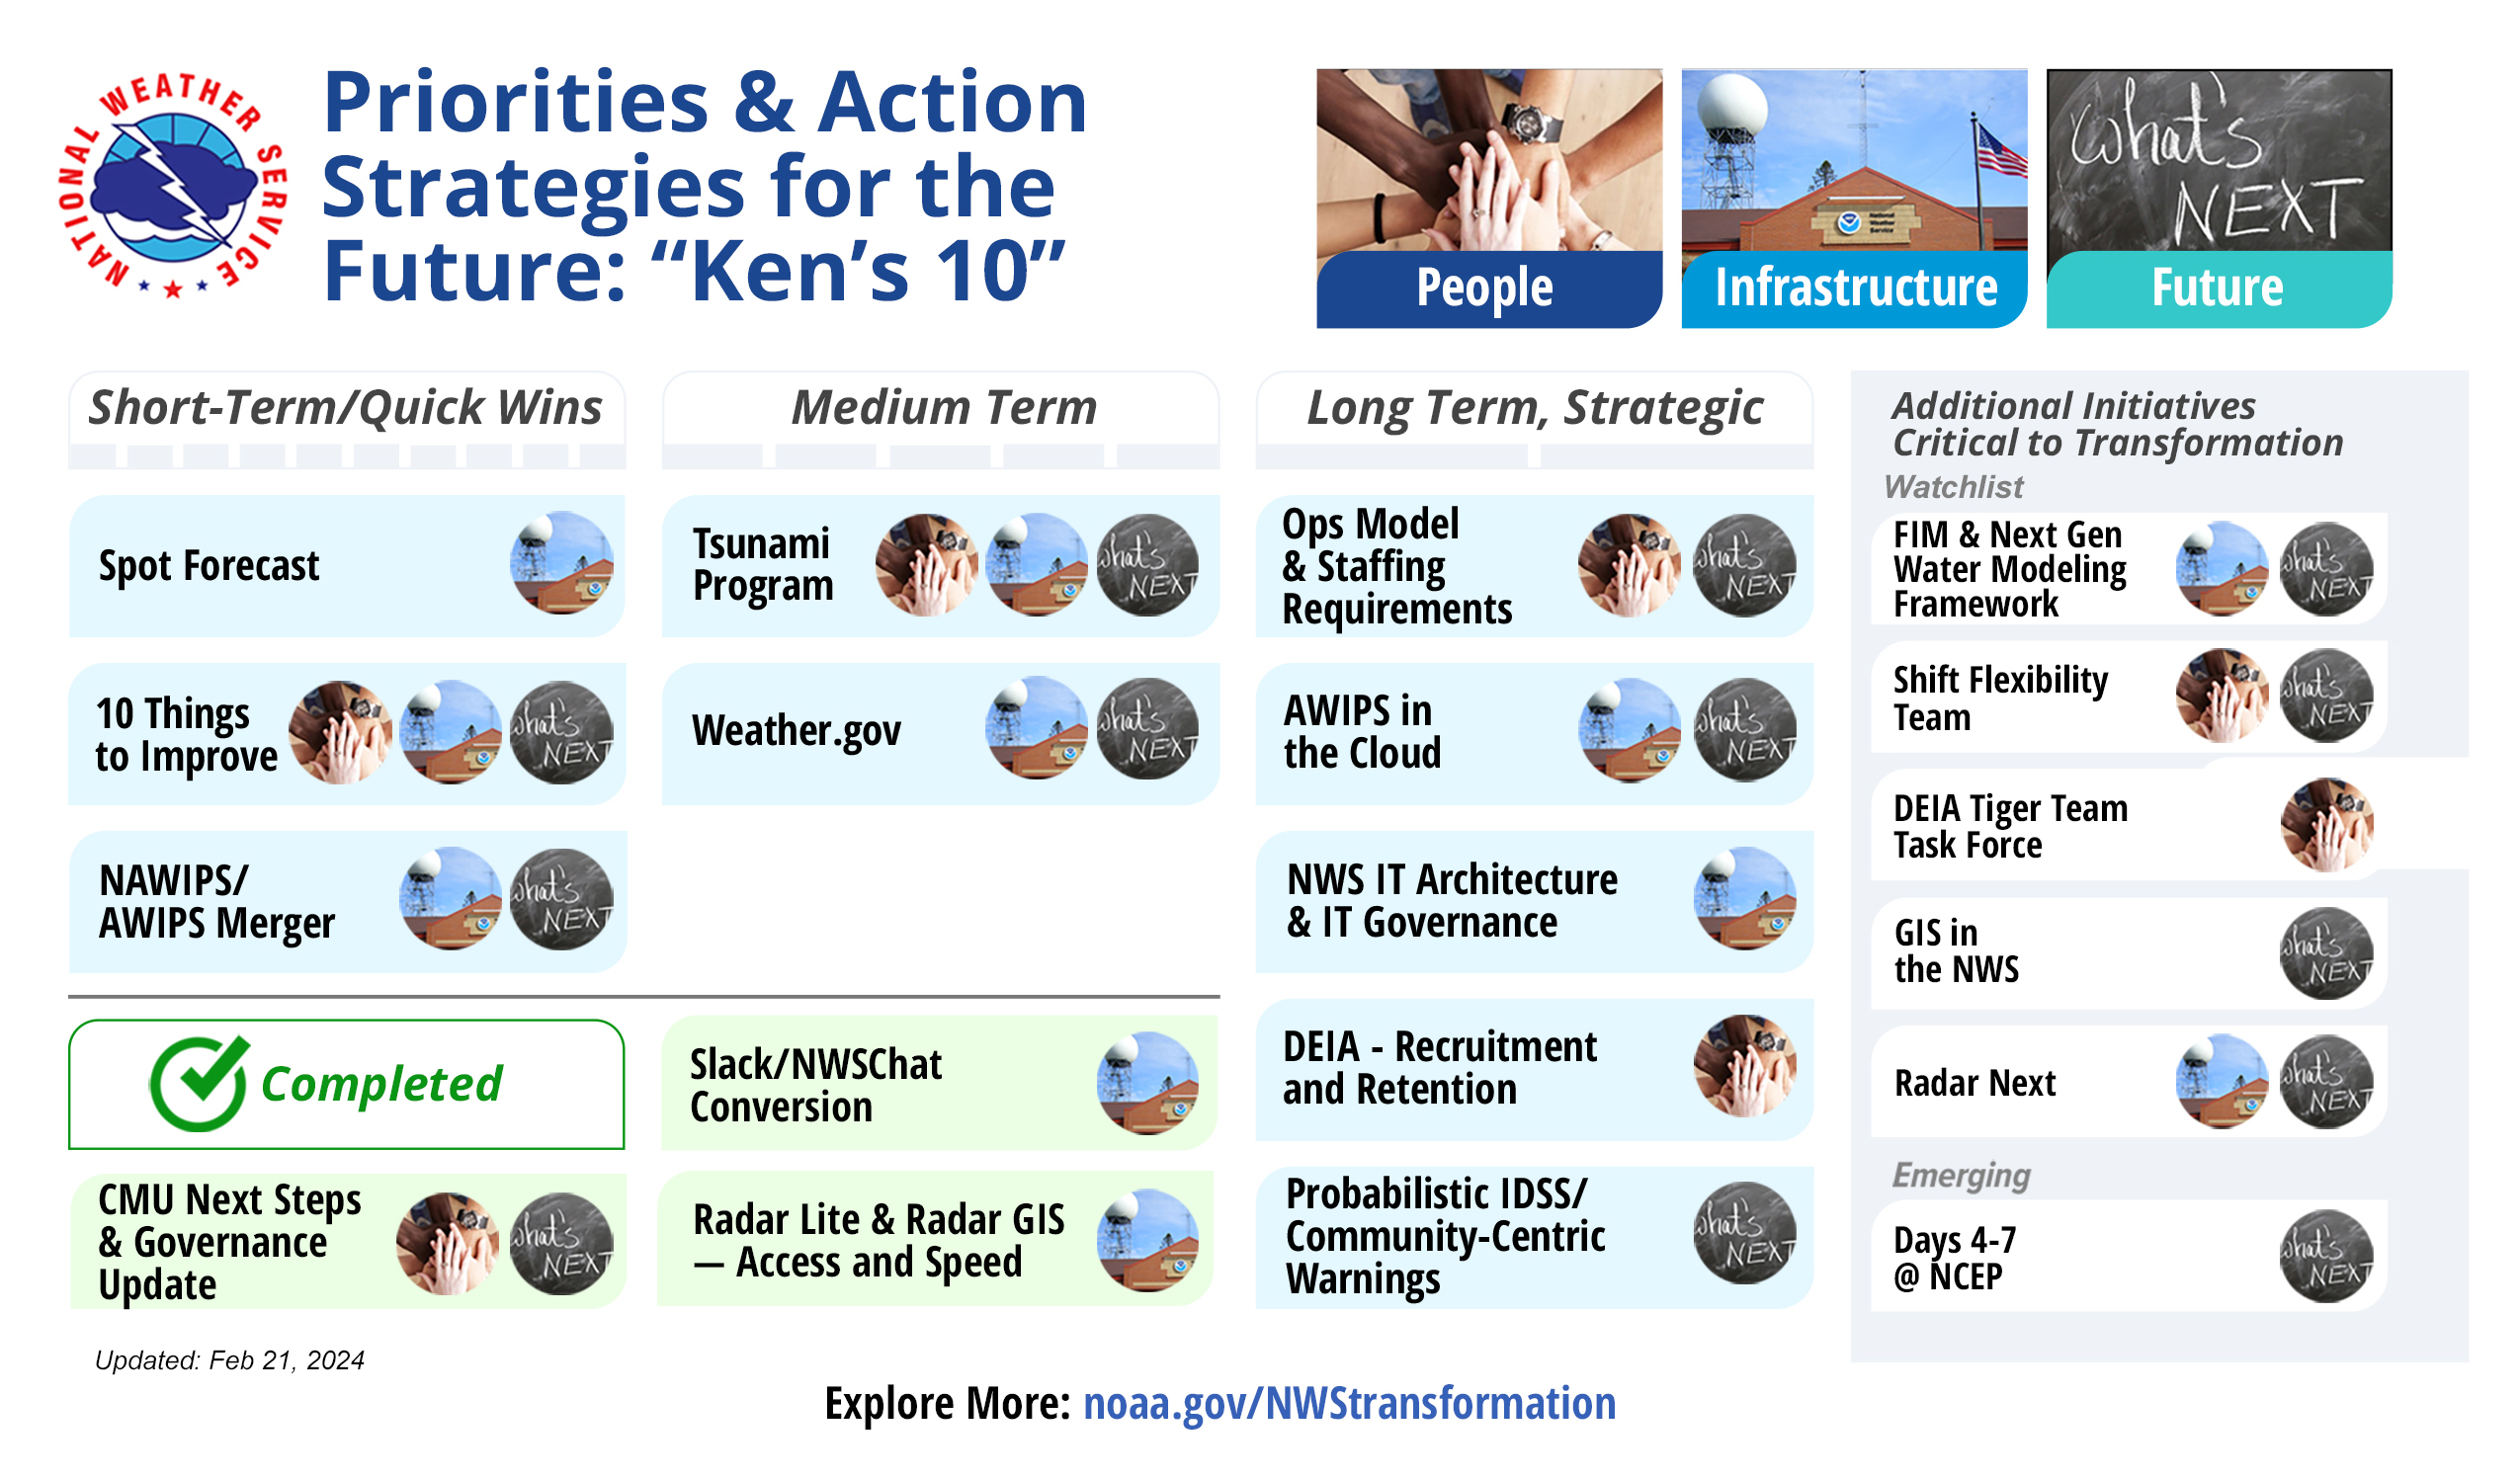 NWS Priorities & Action Strategies for the Future — "Ken's 10"